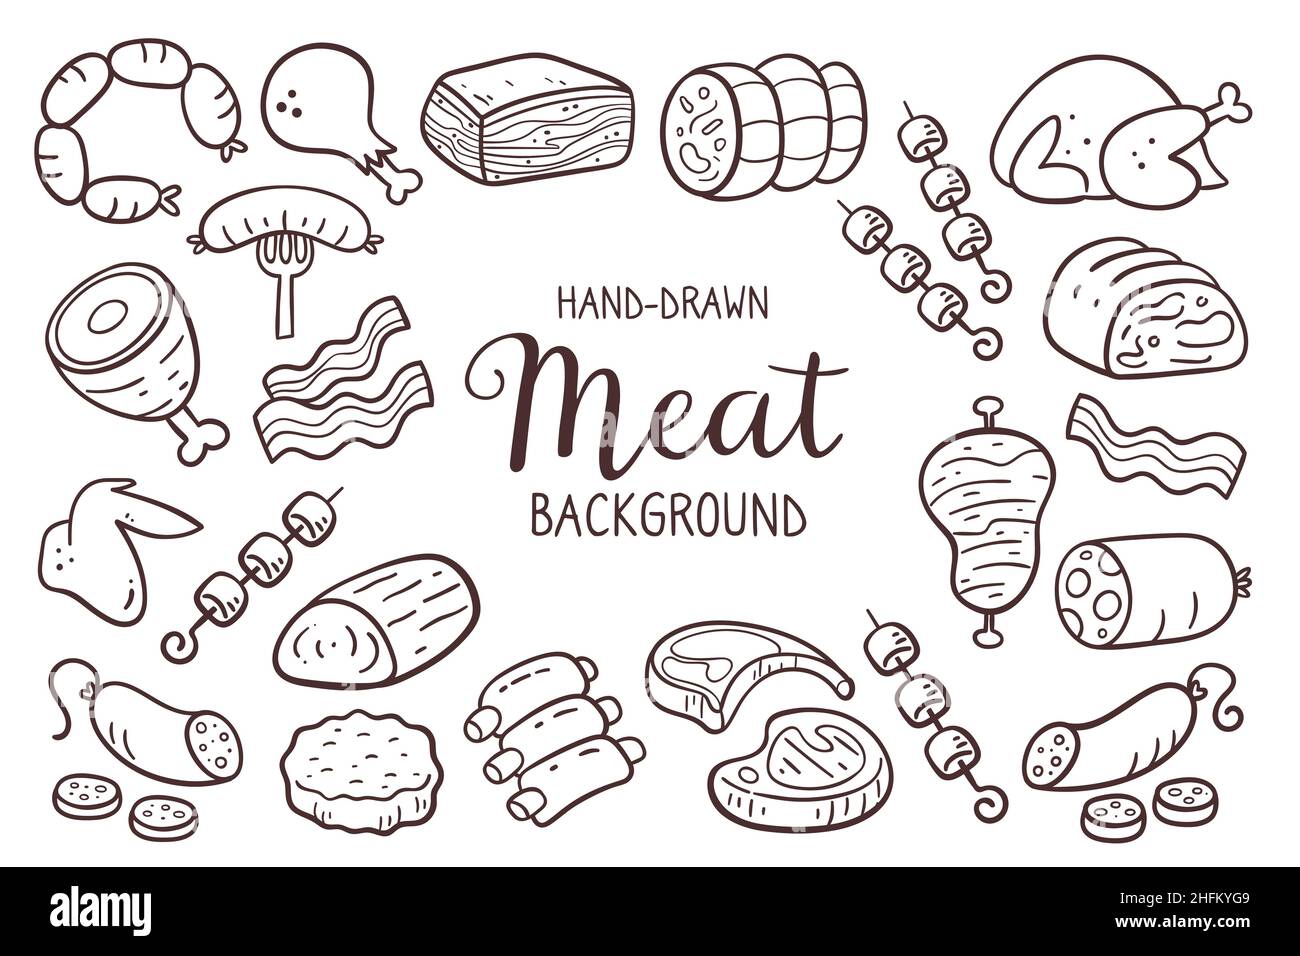 Hand drawn meat background. Pieces of meat and meat products. Food ingredients for cooking illustration. Isolated doodle icons on white background. Ve Stock Vector